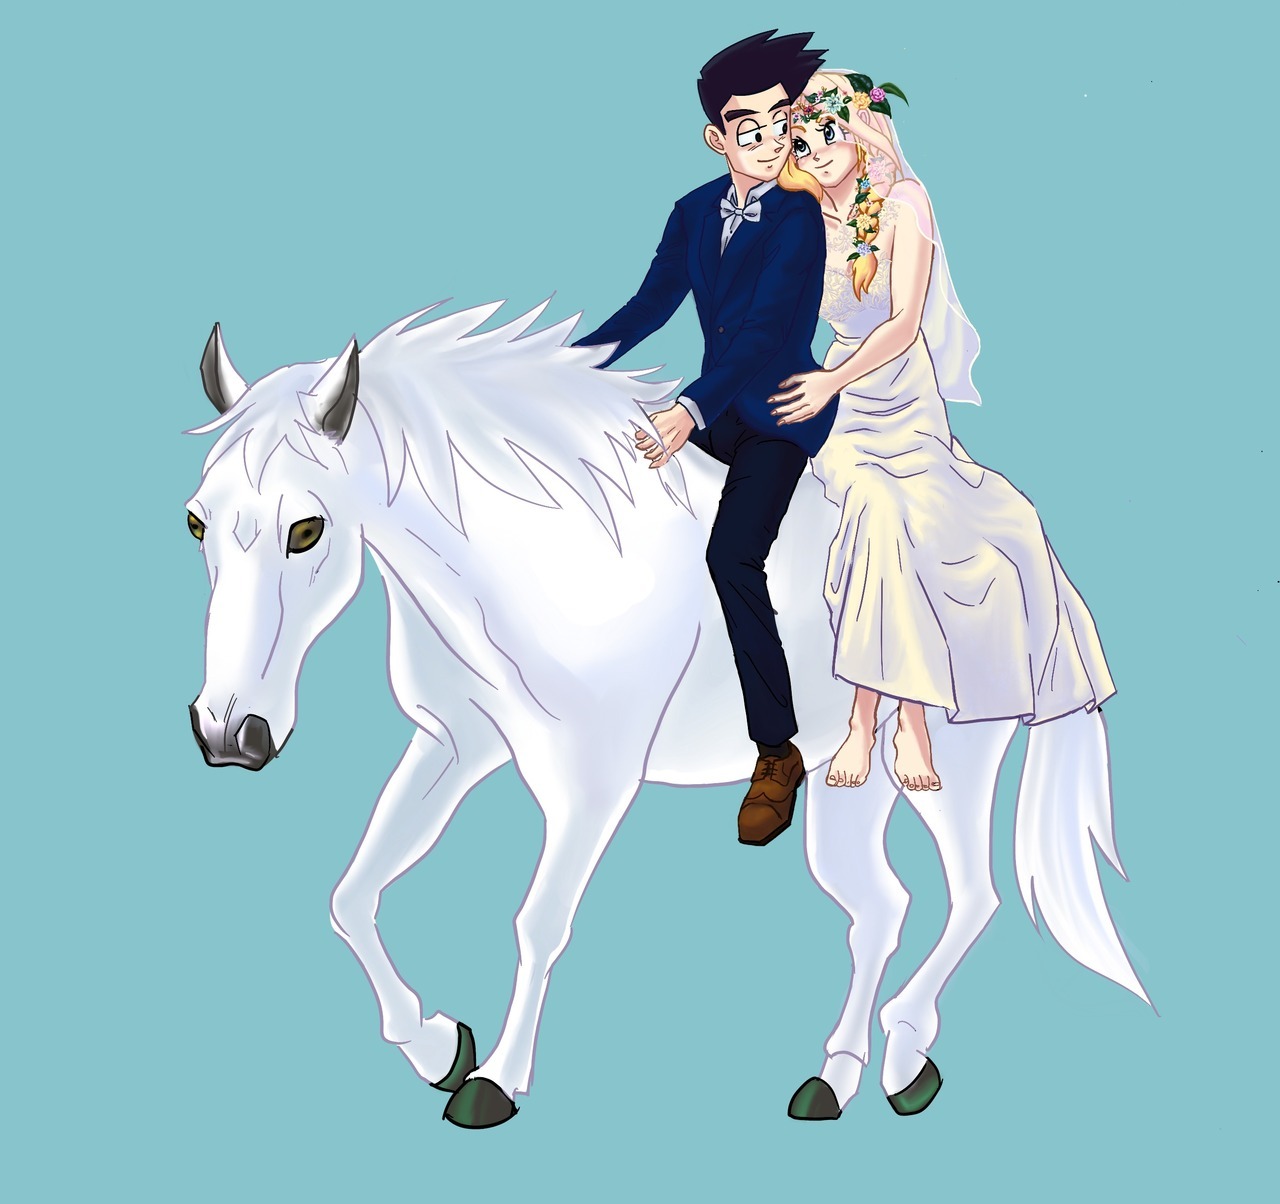 raye-chan:
“And last but not least - a continuation to ‘Goten’s Bride’ (https://raye-chan.tumblr.com/post/176997094222/bride-of-goten-enjoy) featuring the Groom and a horse.
”